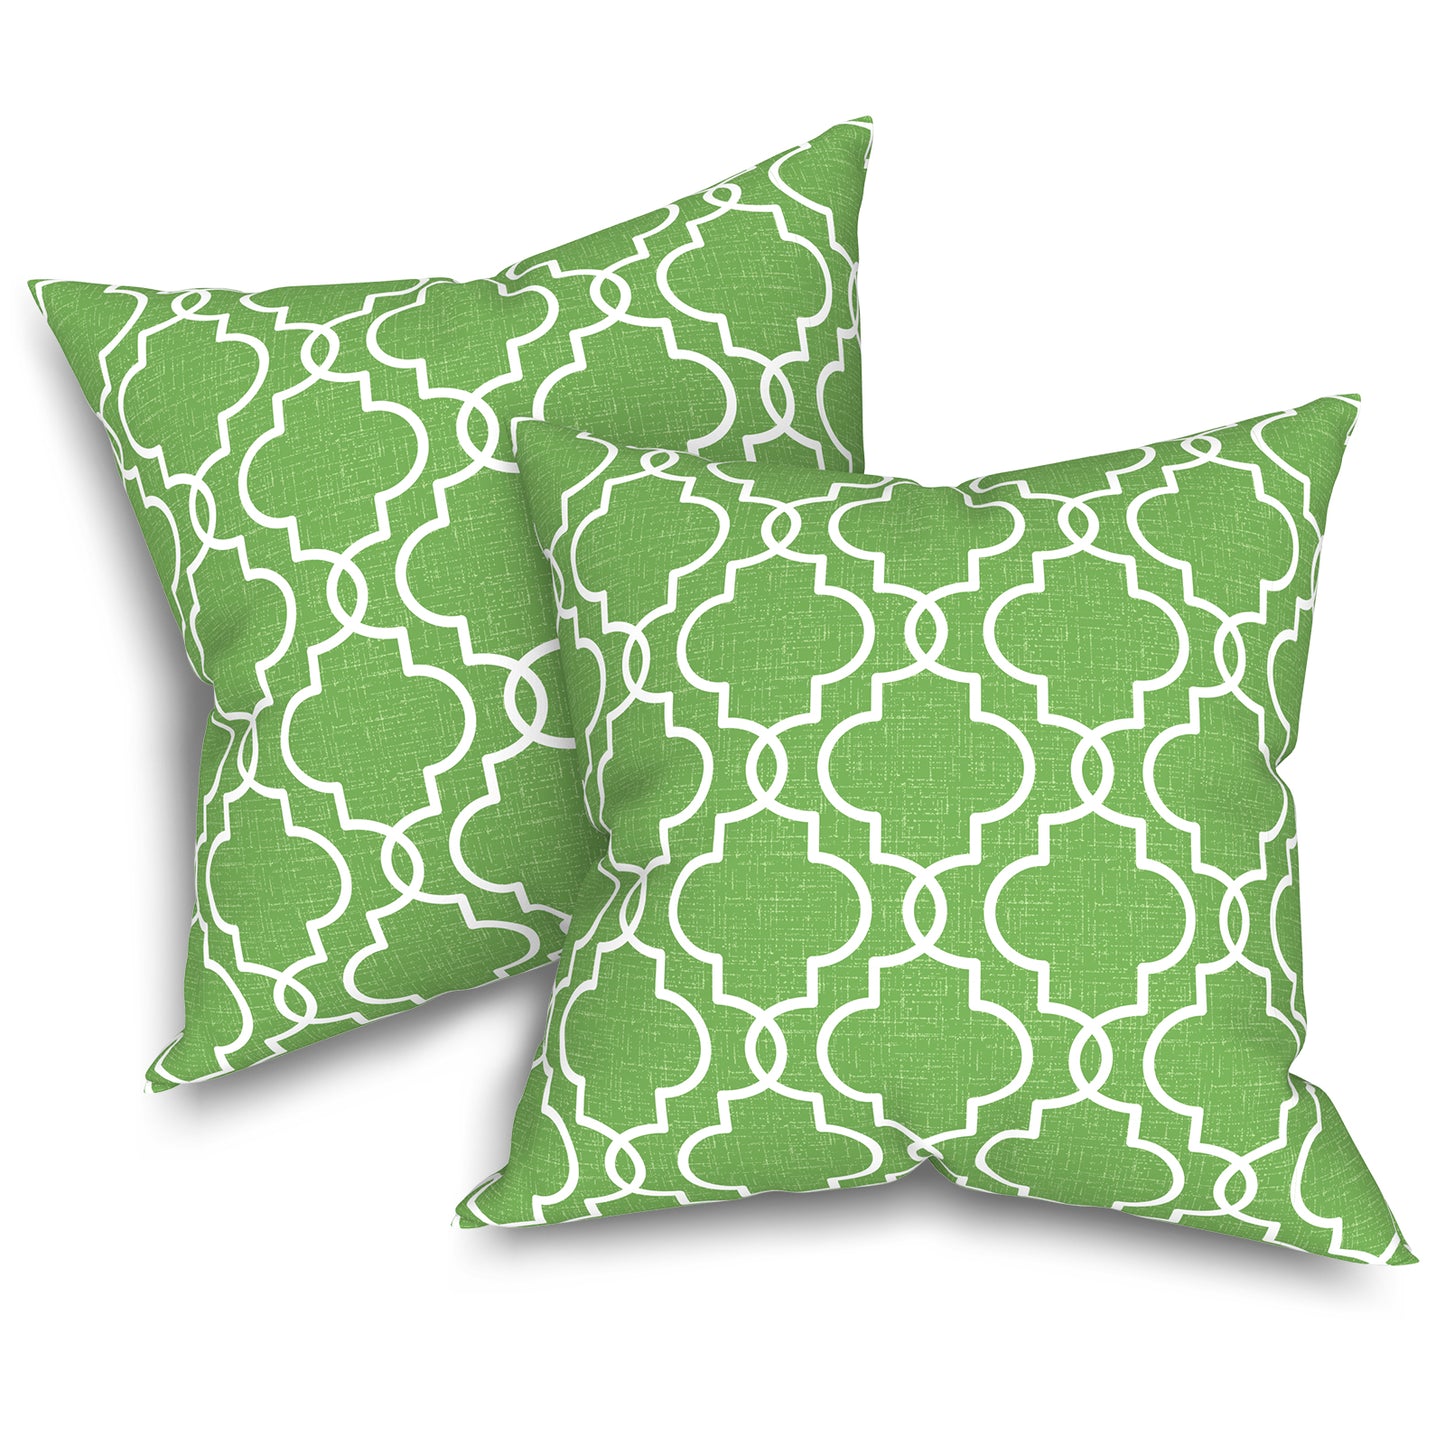 Melody Elephant Outdoor Throw Pillow Covers Pack of 2, Decorative Water Repellent Square Pillow Cases 18x18 Inch, Patio Pillowcases for Home Patio Furniture Use, Carmody Green